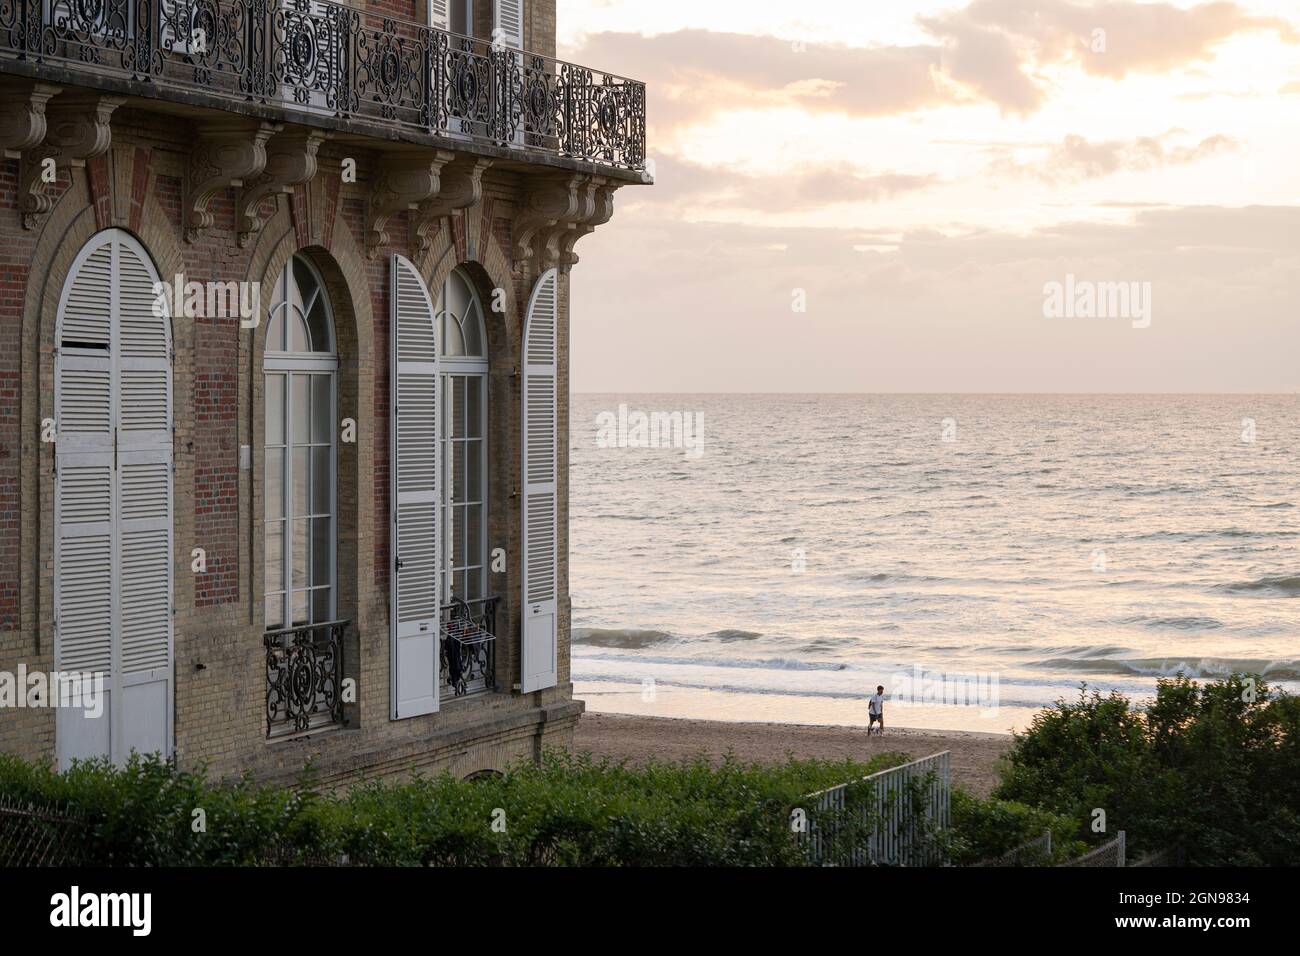 Luxurious Balcony facing the Channel at sunset,a man runs on the beach Stock Photo